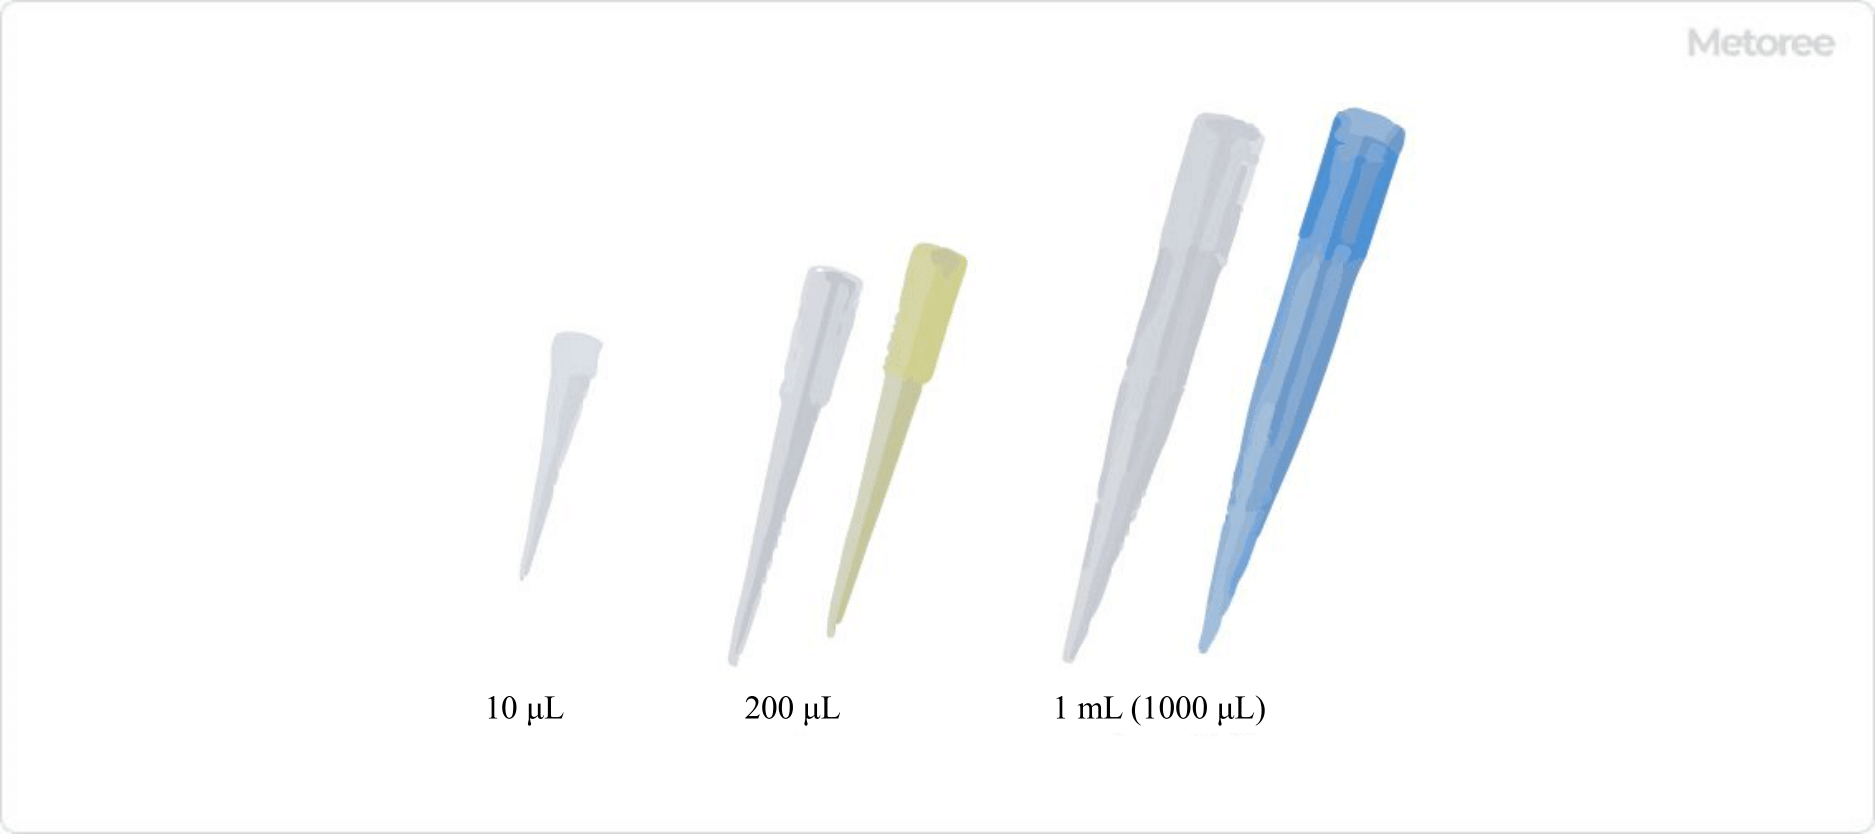 Figure 3. Various pipette tips